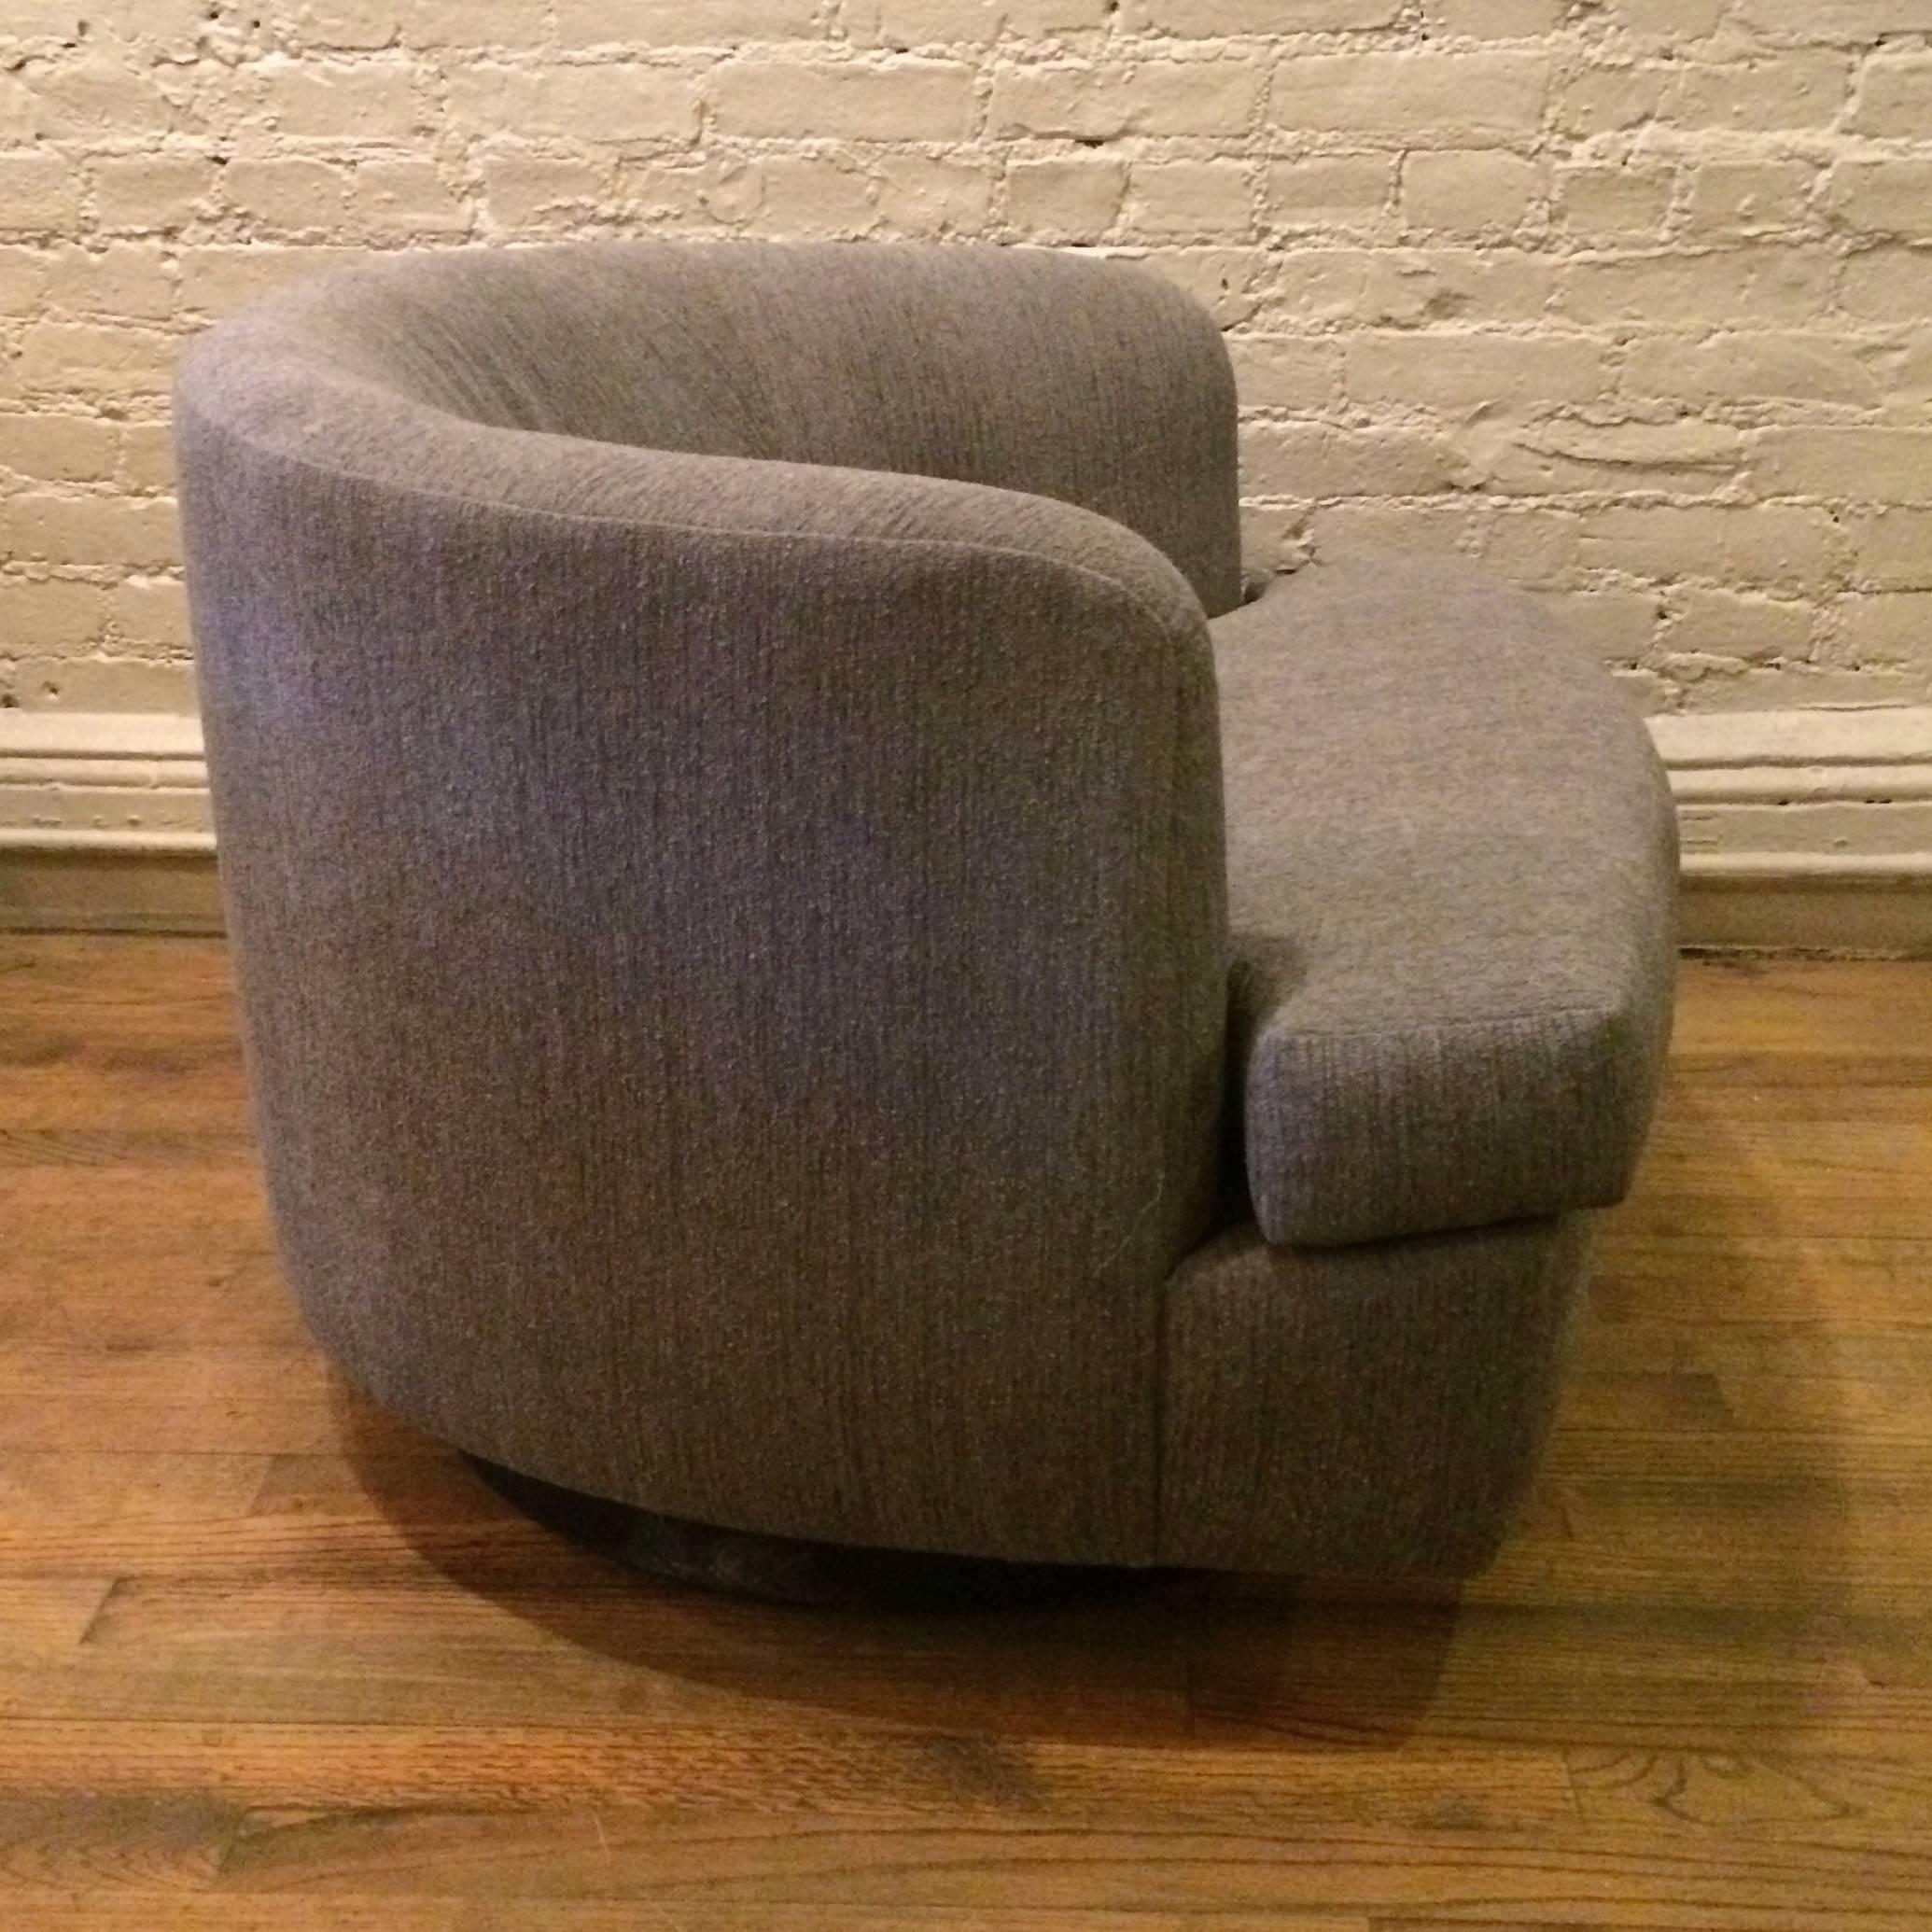 Low profile, plush, barrel shape, club or lounge chair with swivel action is fully upholstered in a soft gray/blue chenille.